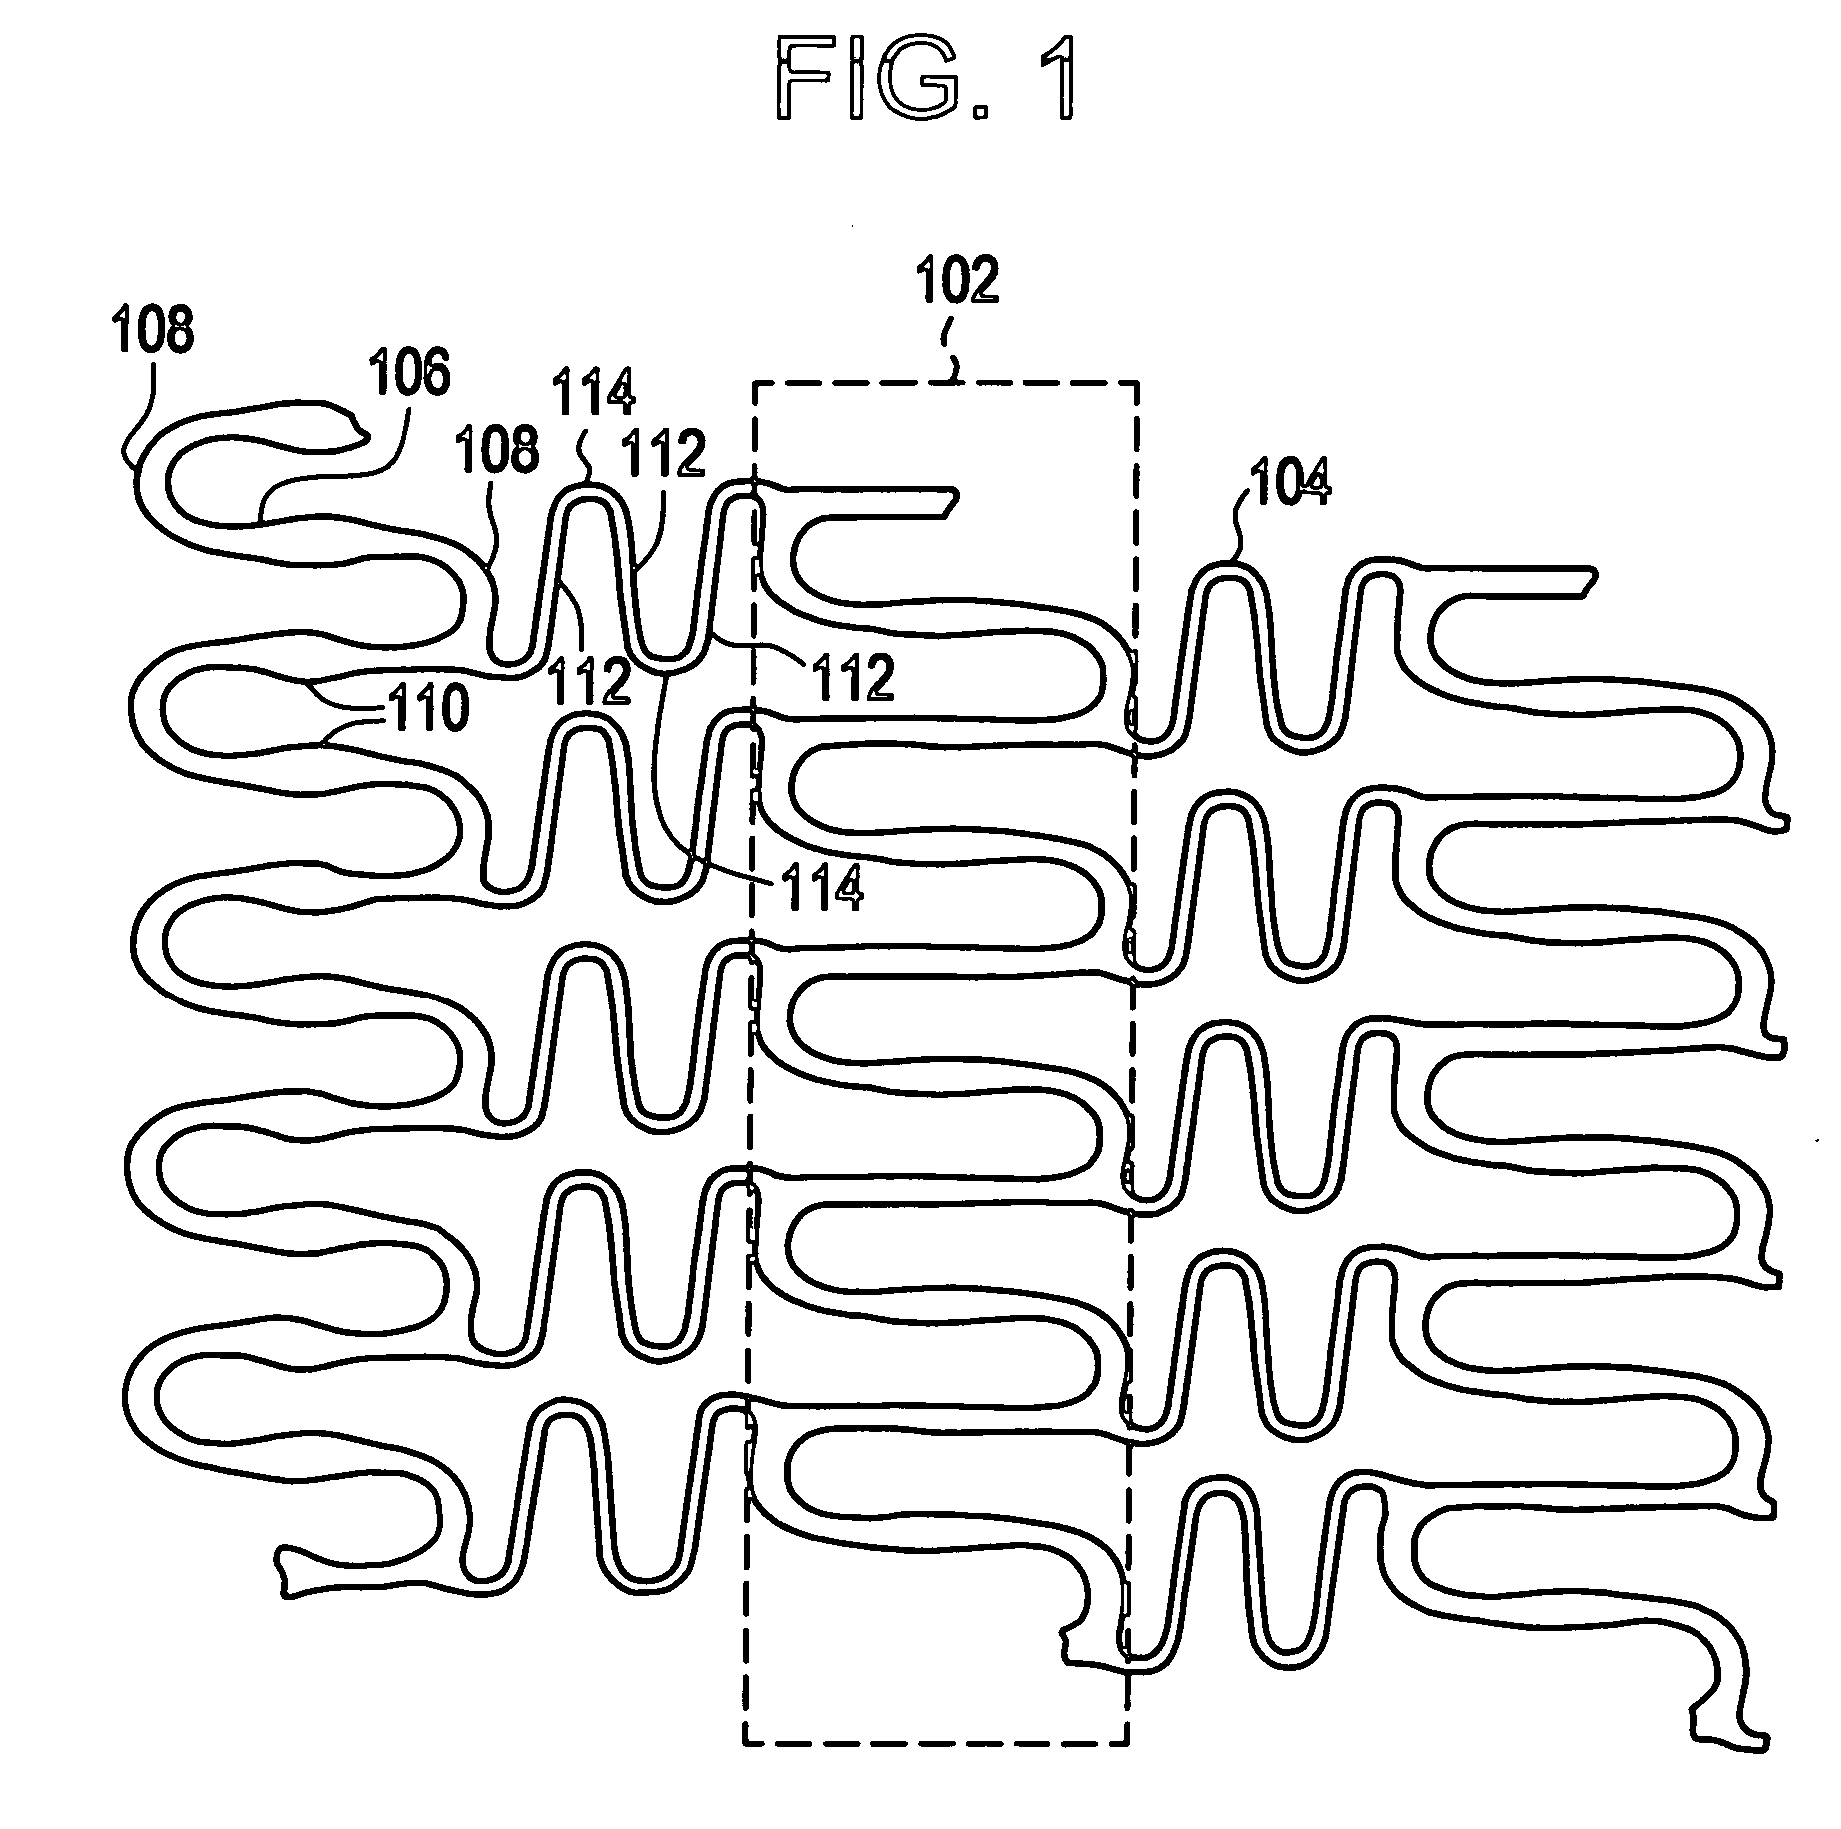 Polymeric stent having modified molecular structures in the flexible connections